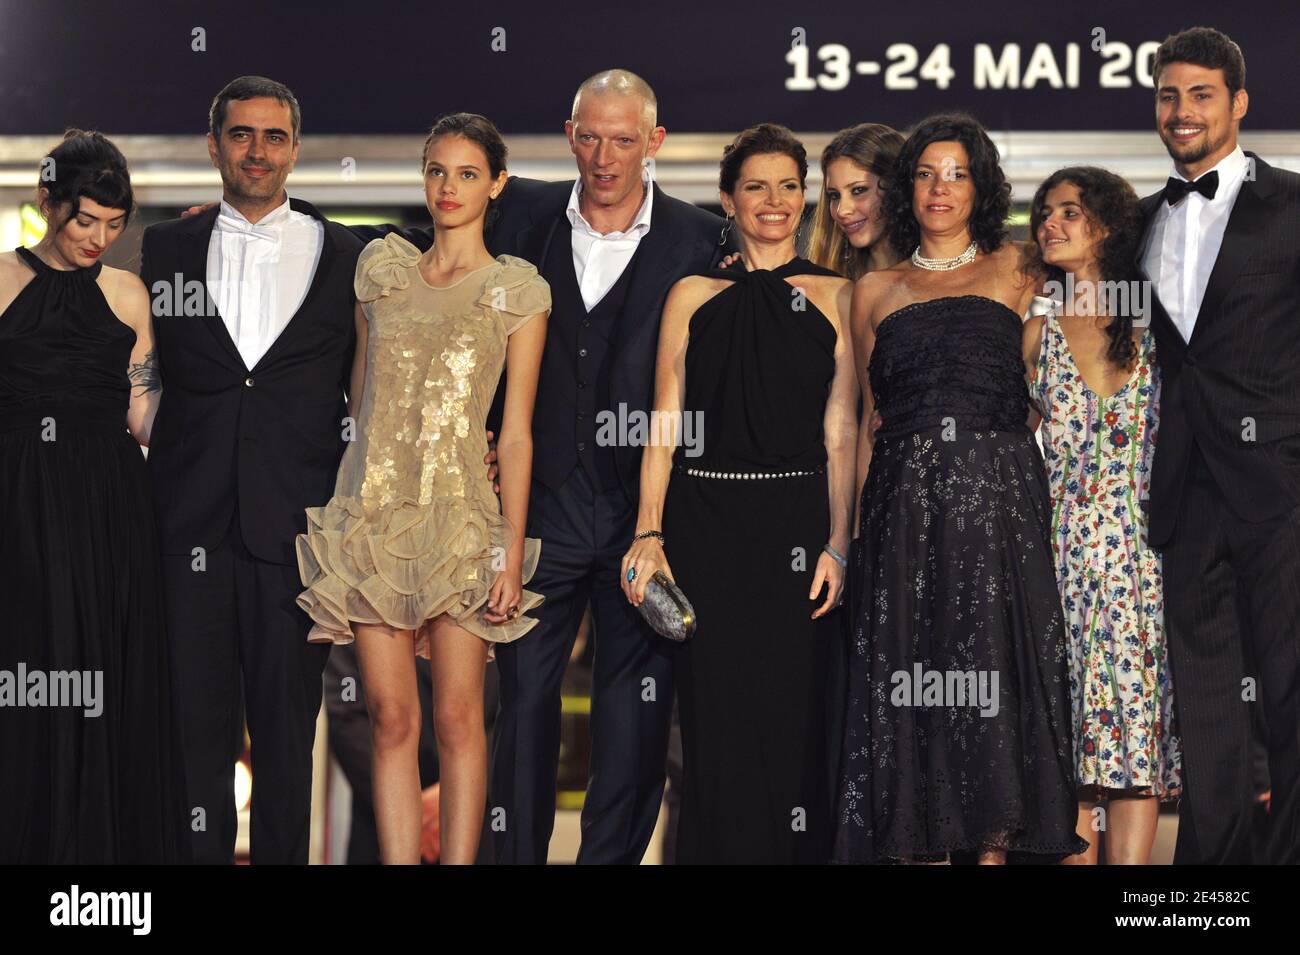 Brazilian actors Nathalia Zemel, Caua Raymond, Josefina Schiler and Debora Bloch, Brazilian director Heitor Dhalia, Brazilian actress Laura Neiva and French actor Vincent Cassel arriving for the screening of 'The White Ribbon' during the 62nd Cannes Film Festival at the Palais des Festivals in Cannes, France on May 21, 2009. Photo by Nebinger-Orban/ABACAPRESS.COM Stock Photo